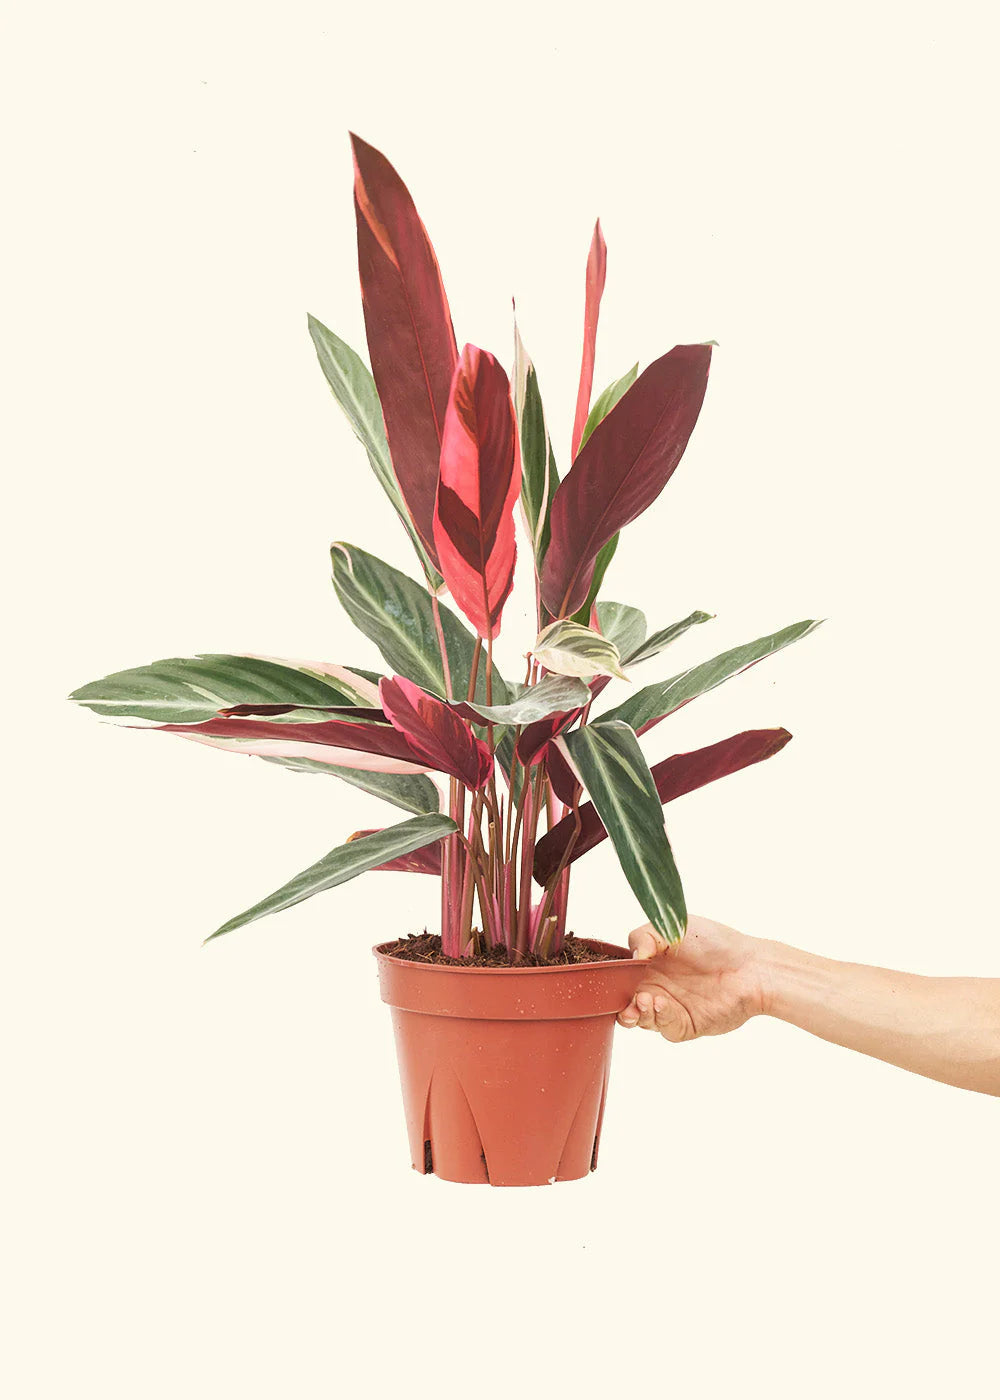 Calathea Triostar (Stromanthe Triostar) indoor house plant with vibrant tricolored leaves in shades of green, pink, and cream.